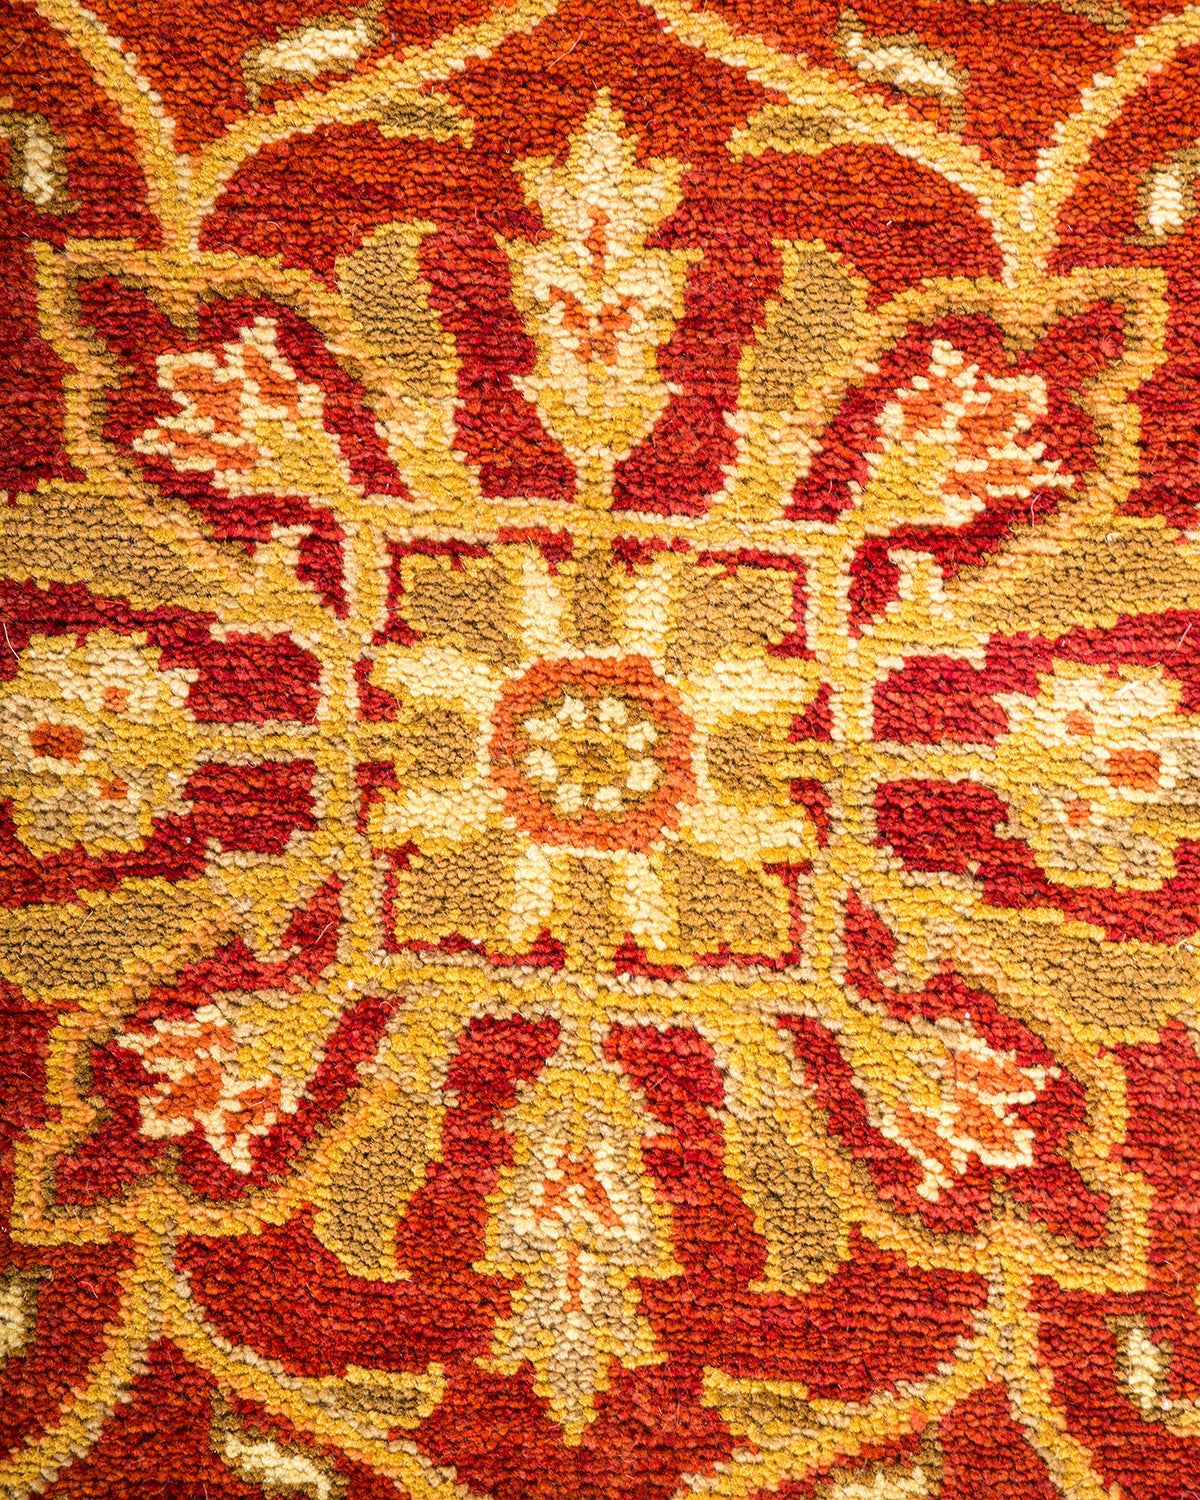 Eclectic, One-of-a-Kind Hand-Knotted Area Rug  - Orange, 6' 4" x 9' 3"